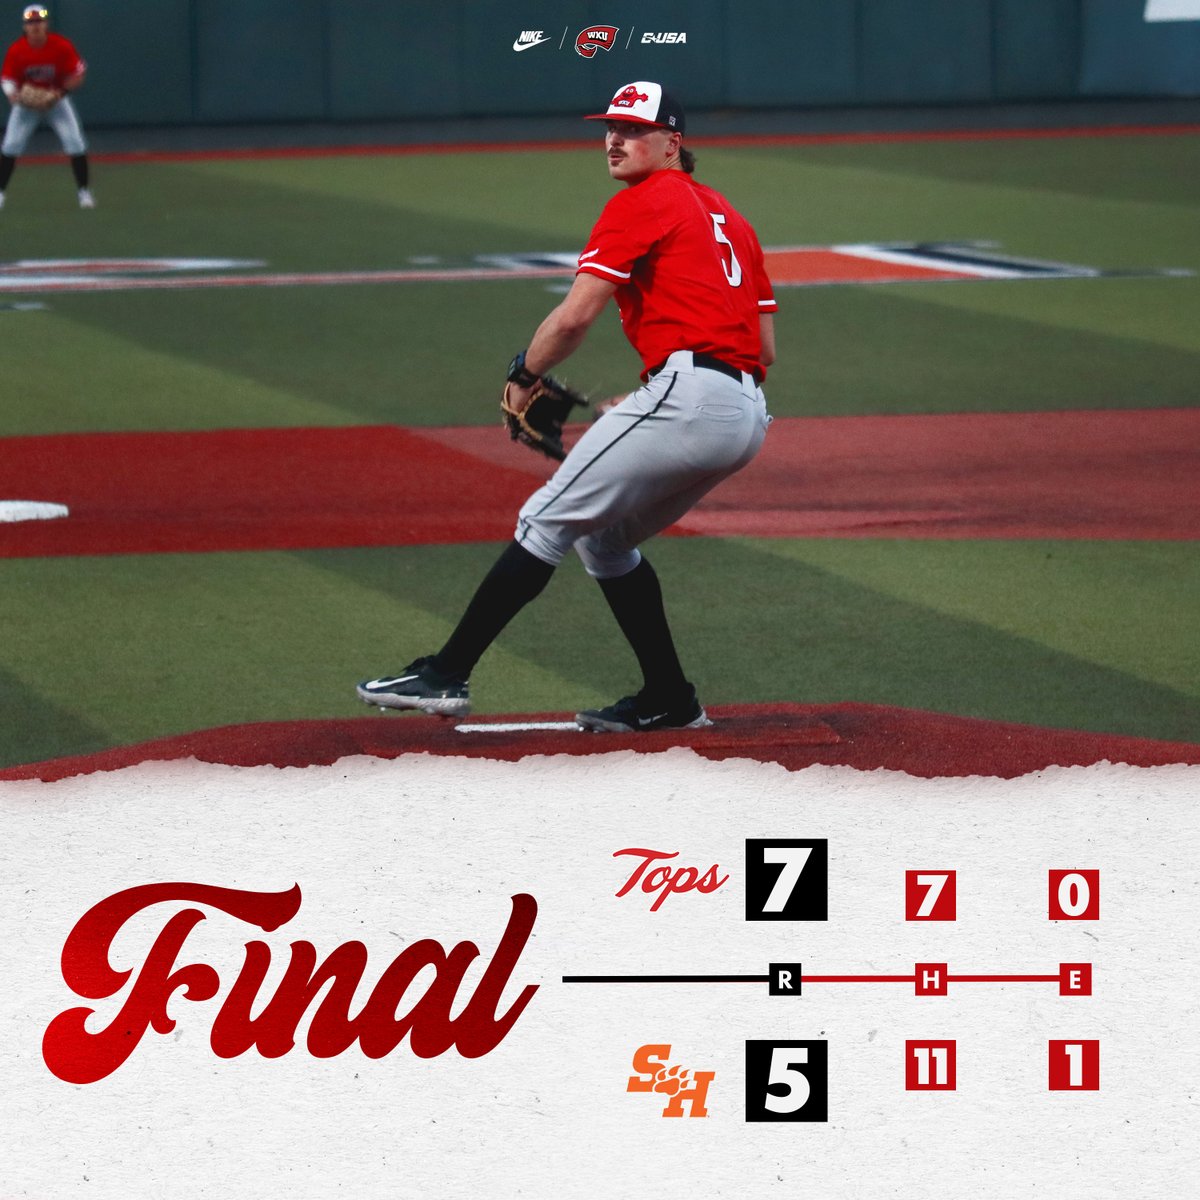 GAME ONE GOES TO THE TOPS ✔️ #GoTops | #TopsOnTop